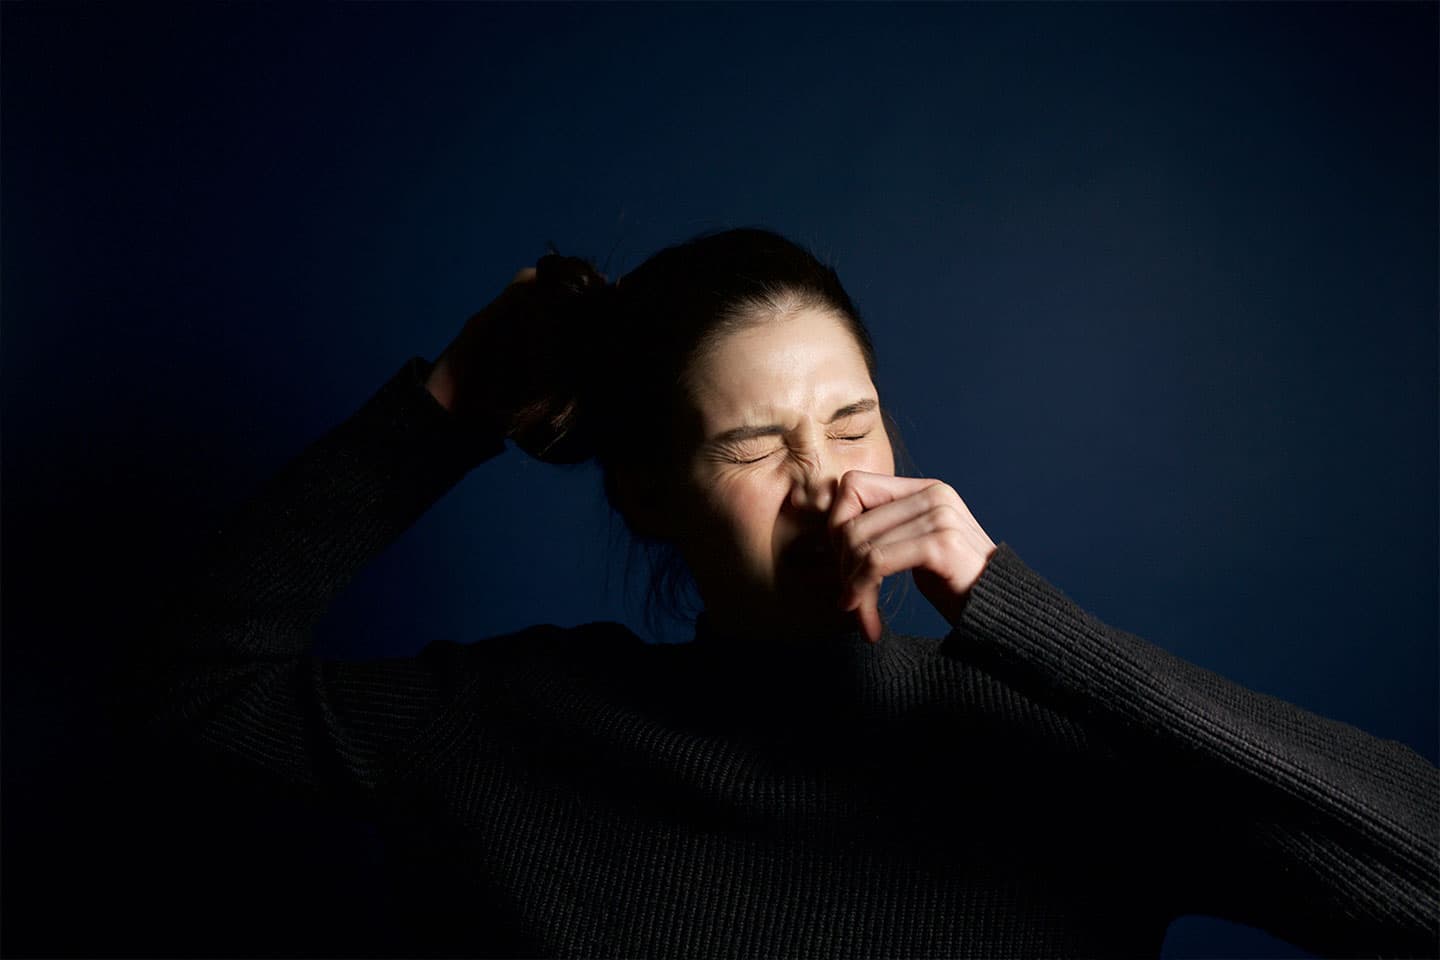 a woman getting ready to sneeze